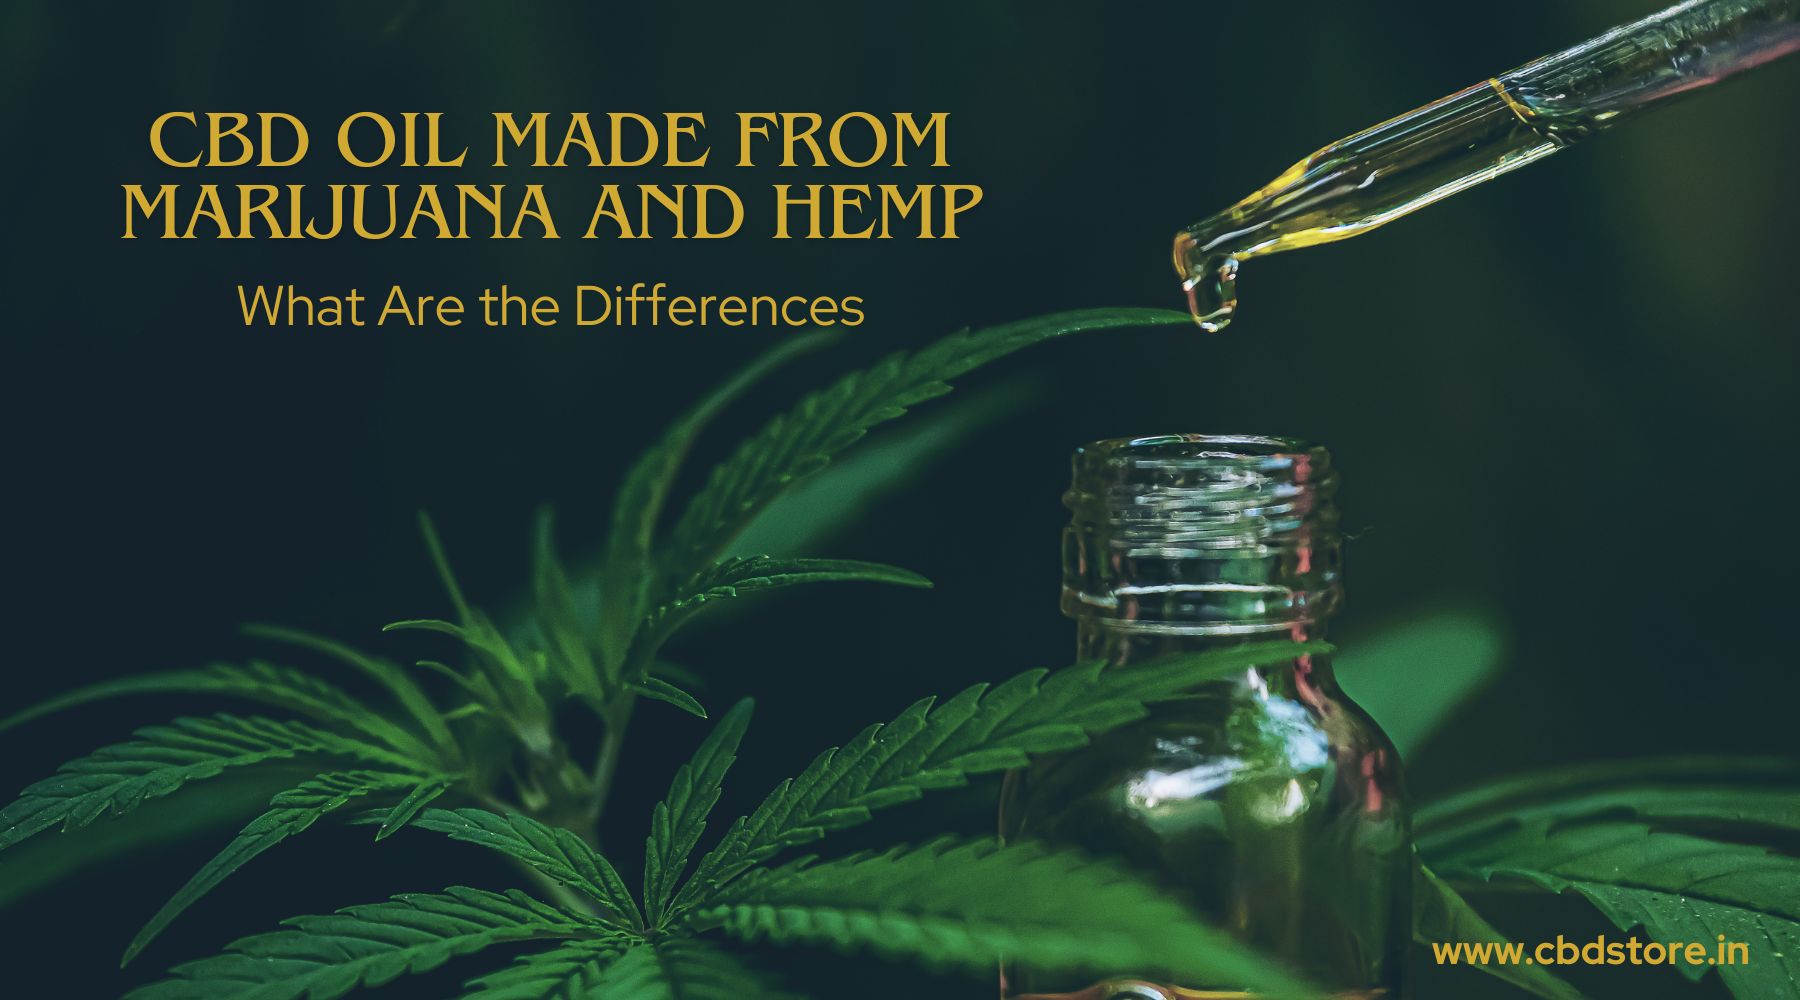 CBD Oil Made from Marijuana and Hemp: What Are the Differences